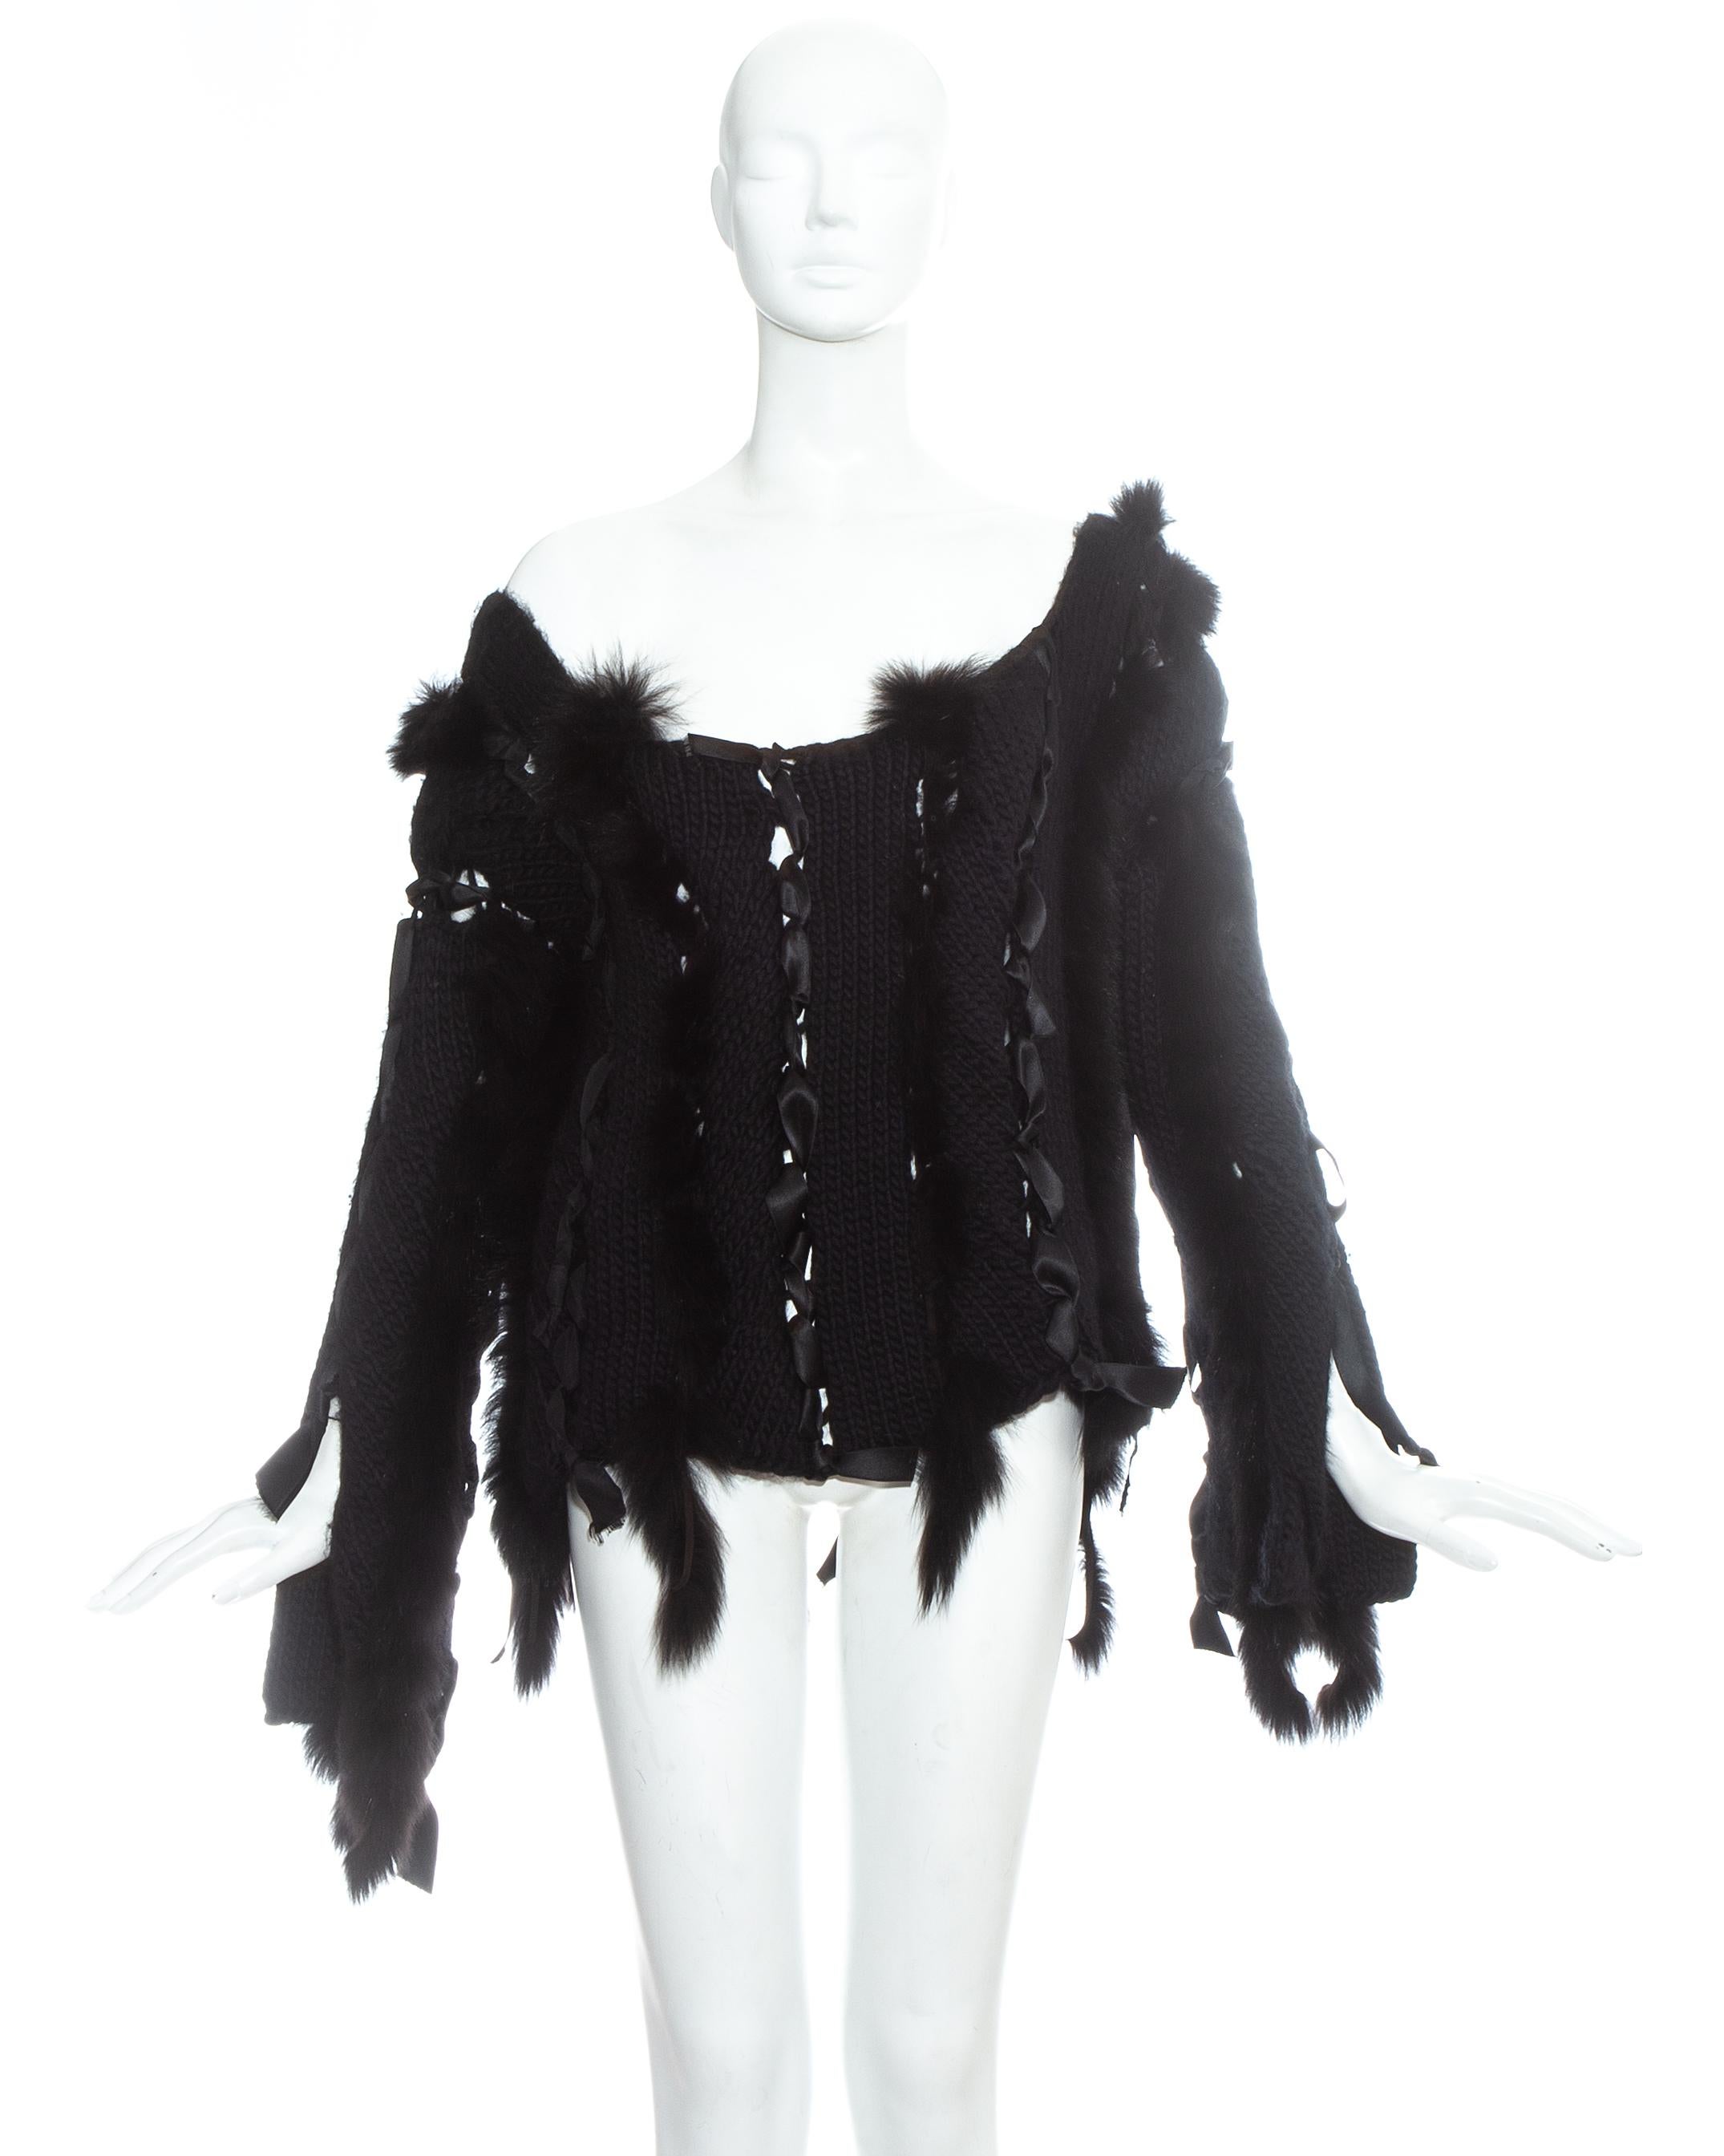 Gucci by Tom Ford black heavy knit oversized sweater woven with fox fur and silk ribbon.

Fall-Winter 2002